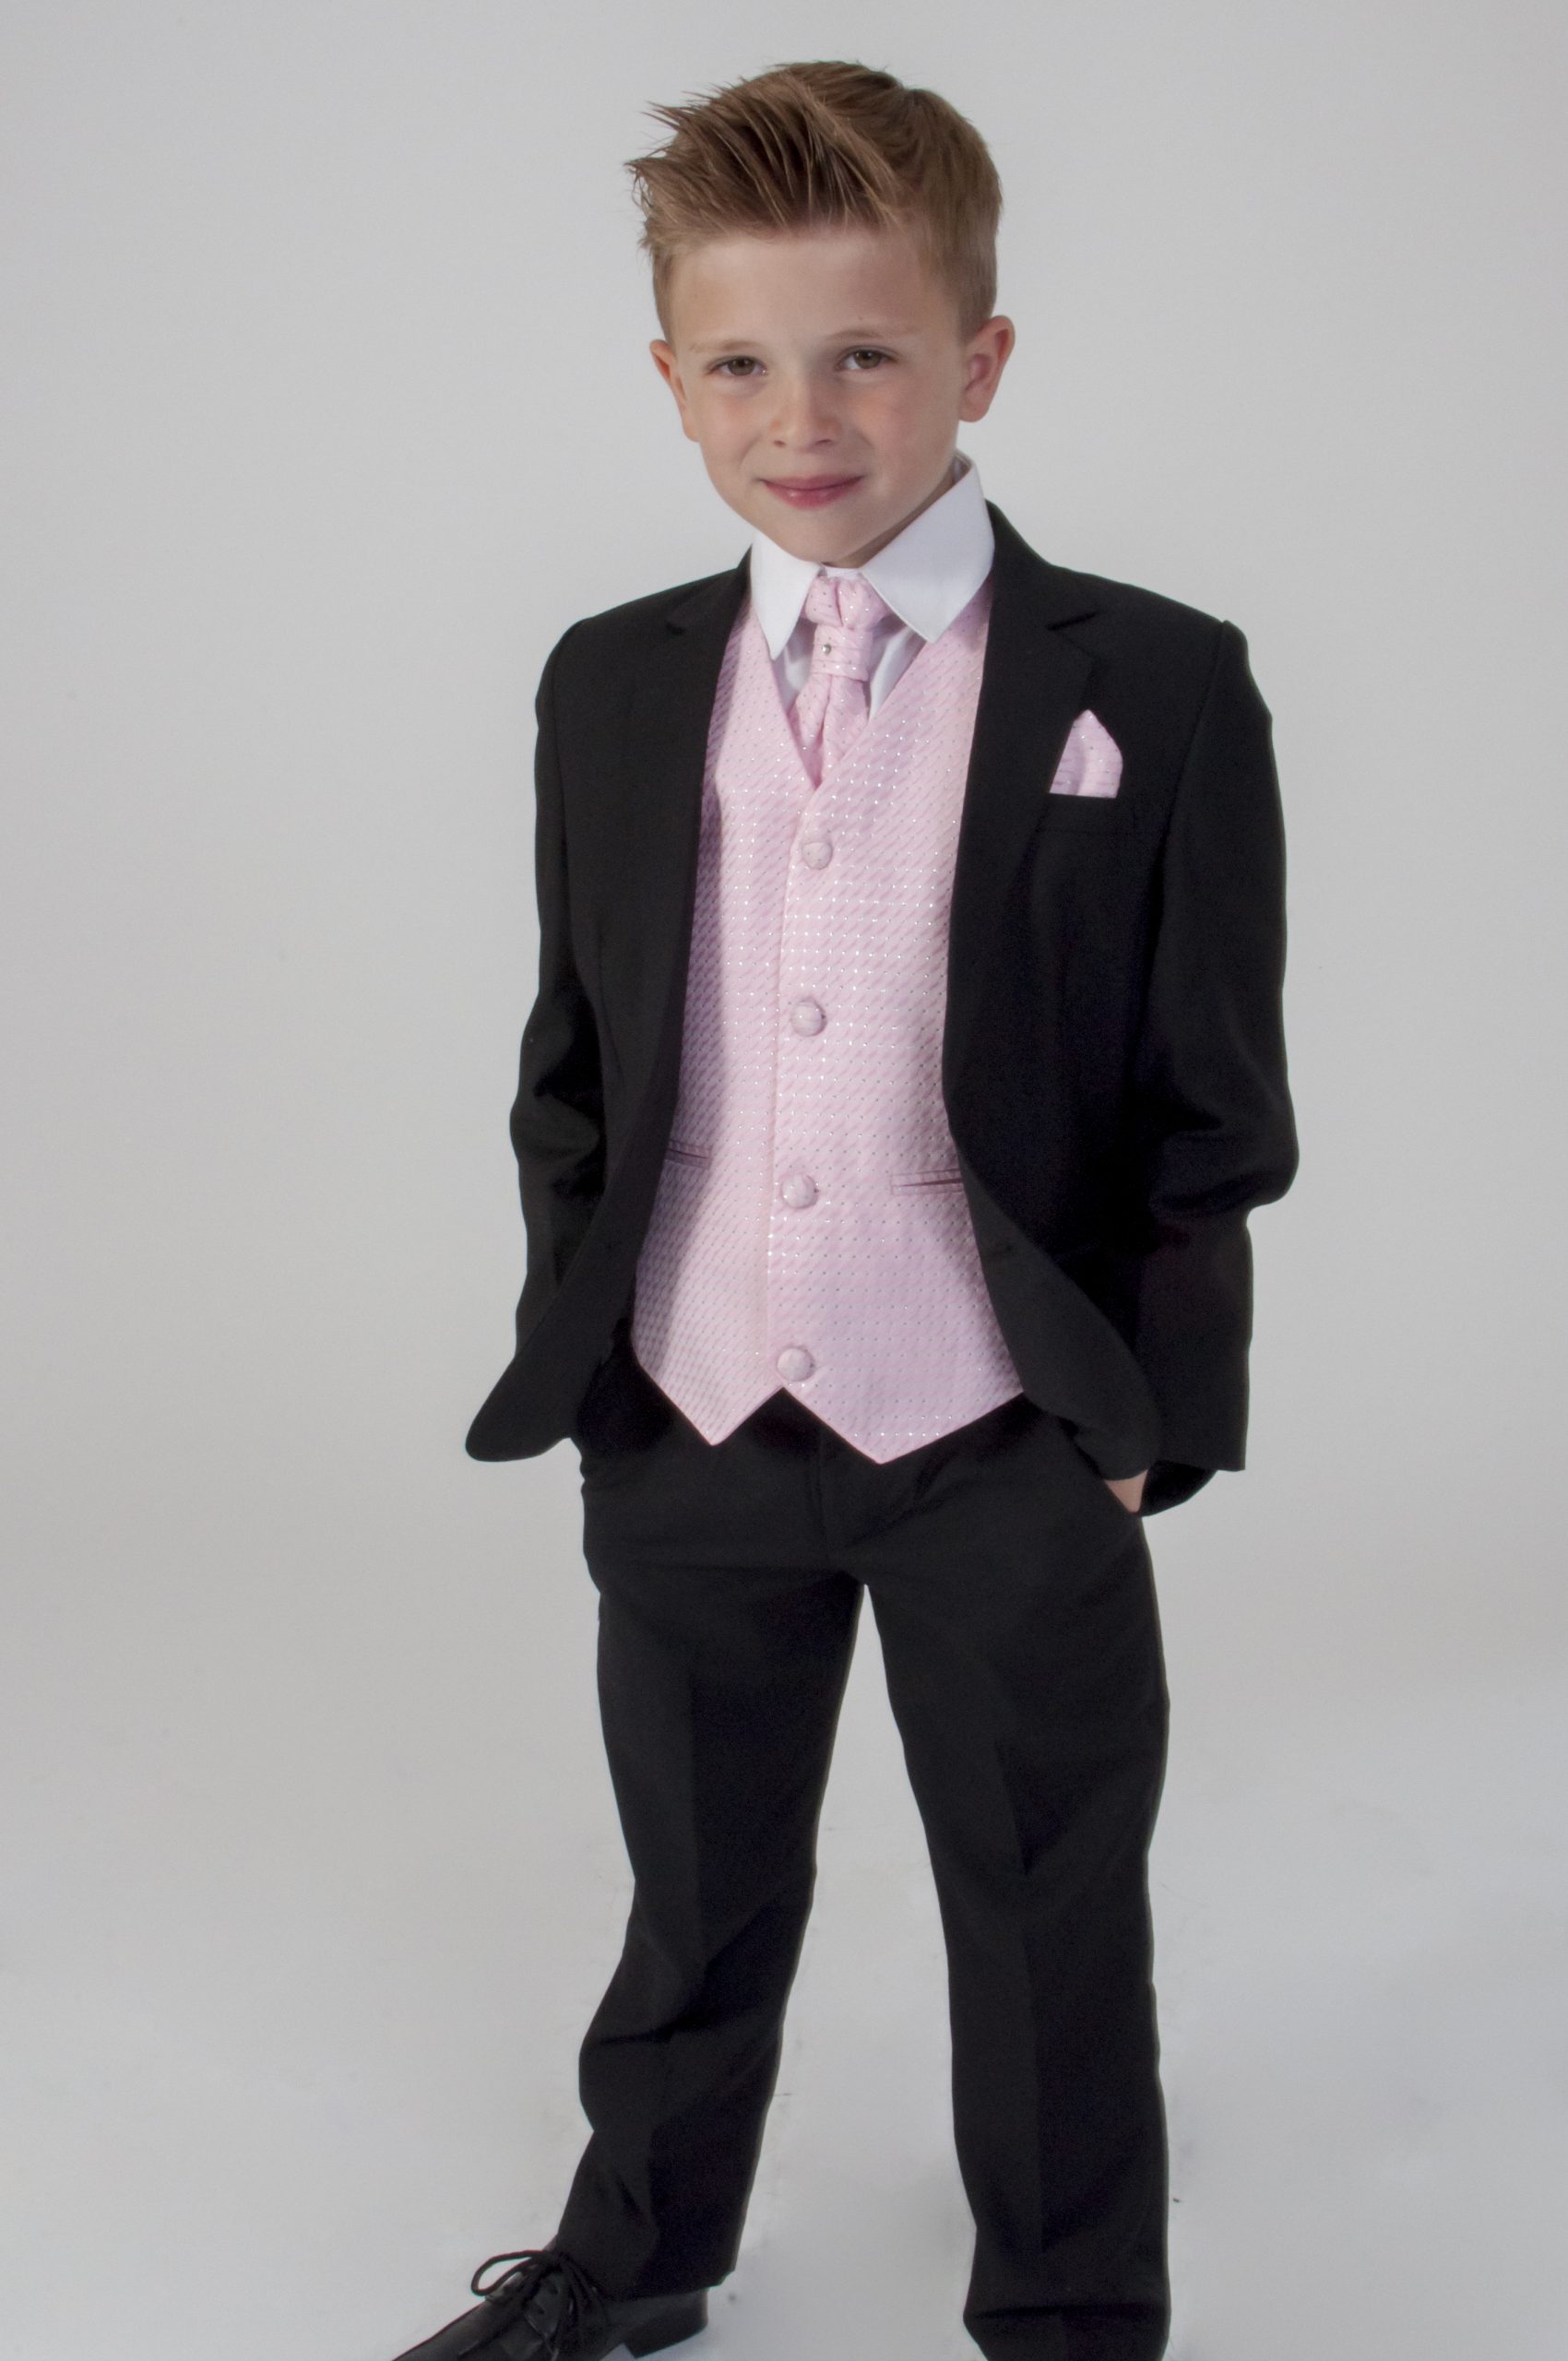 The Christian Boy's 5-piece suit at The Bride Shop in Milton Keynes, featuring a beautiful cameo pink vest and black jacket and trousers, suitable for weddings and formal events for boys